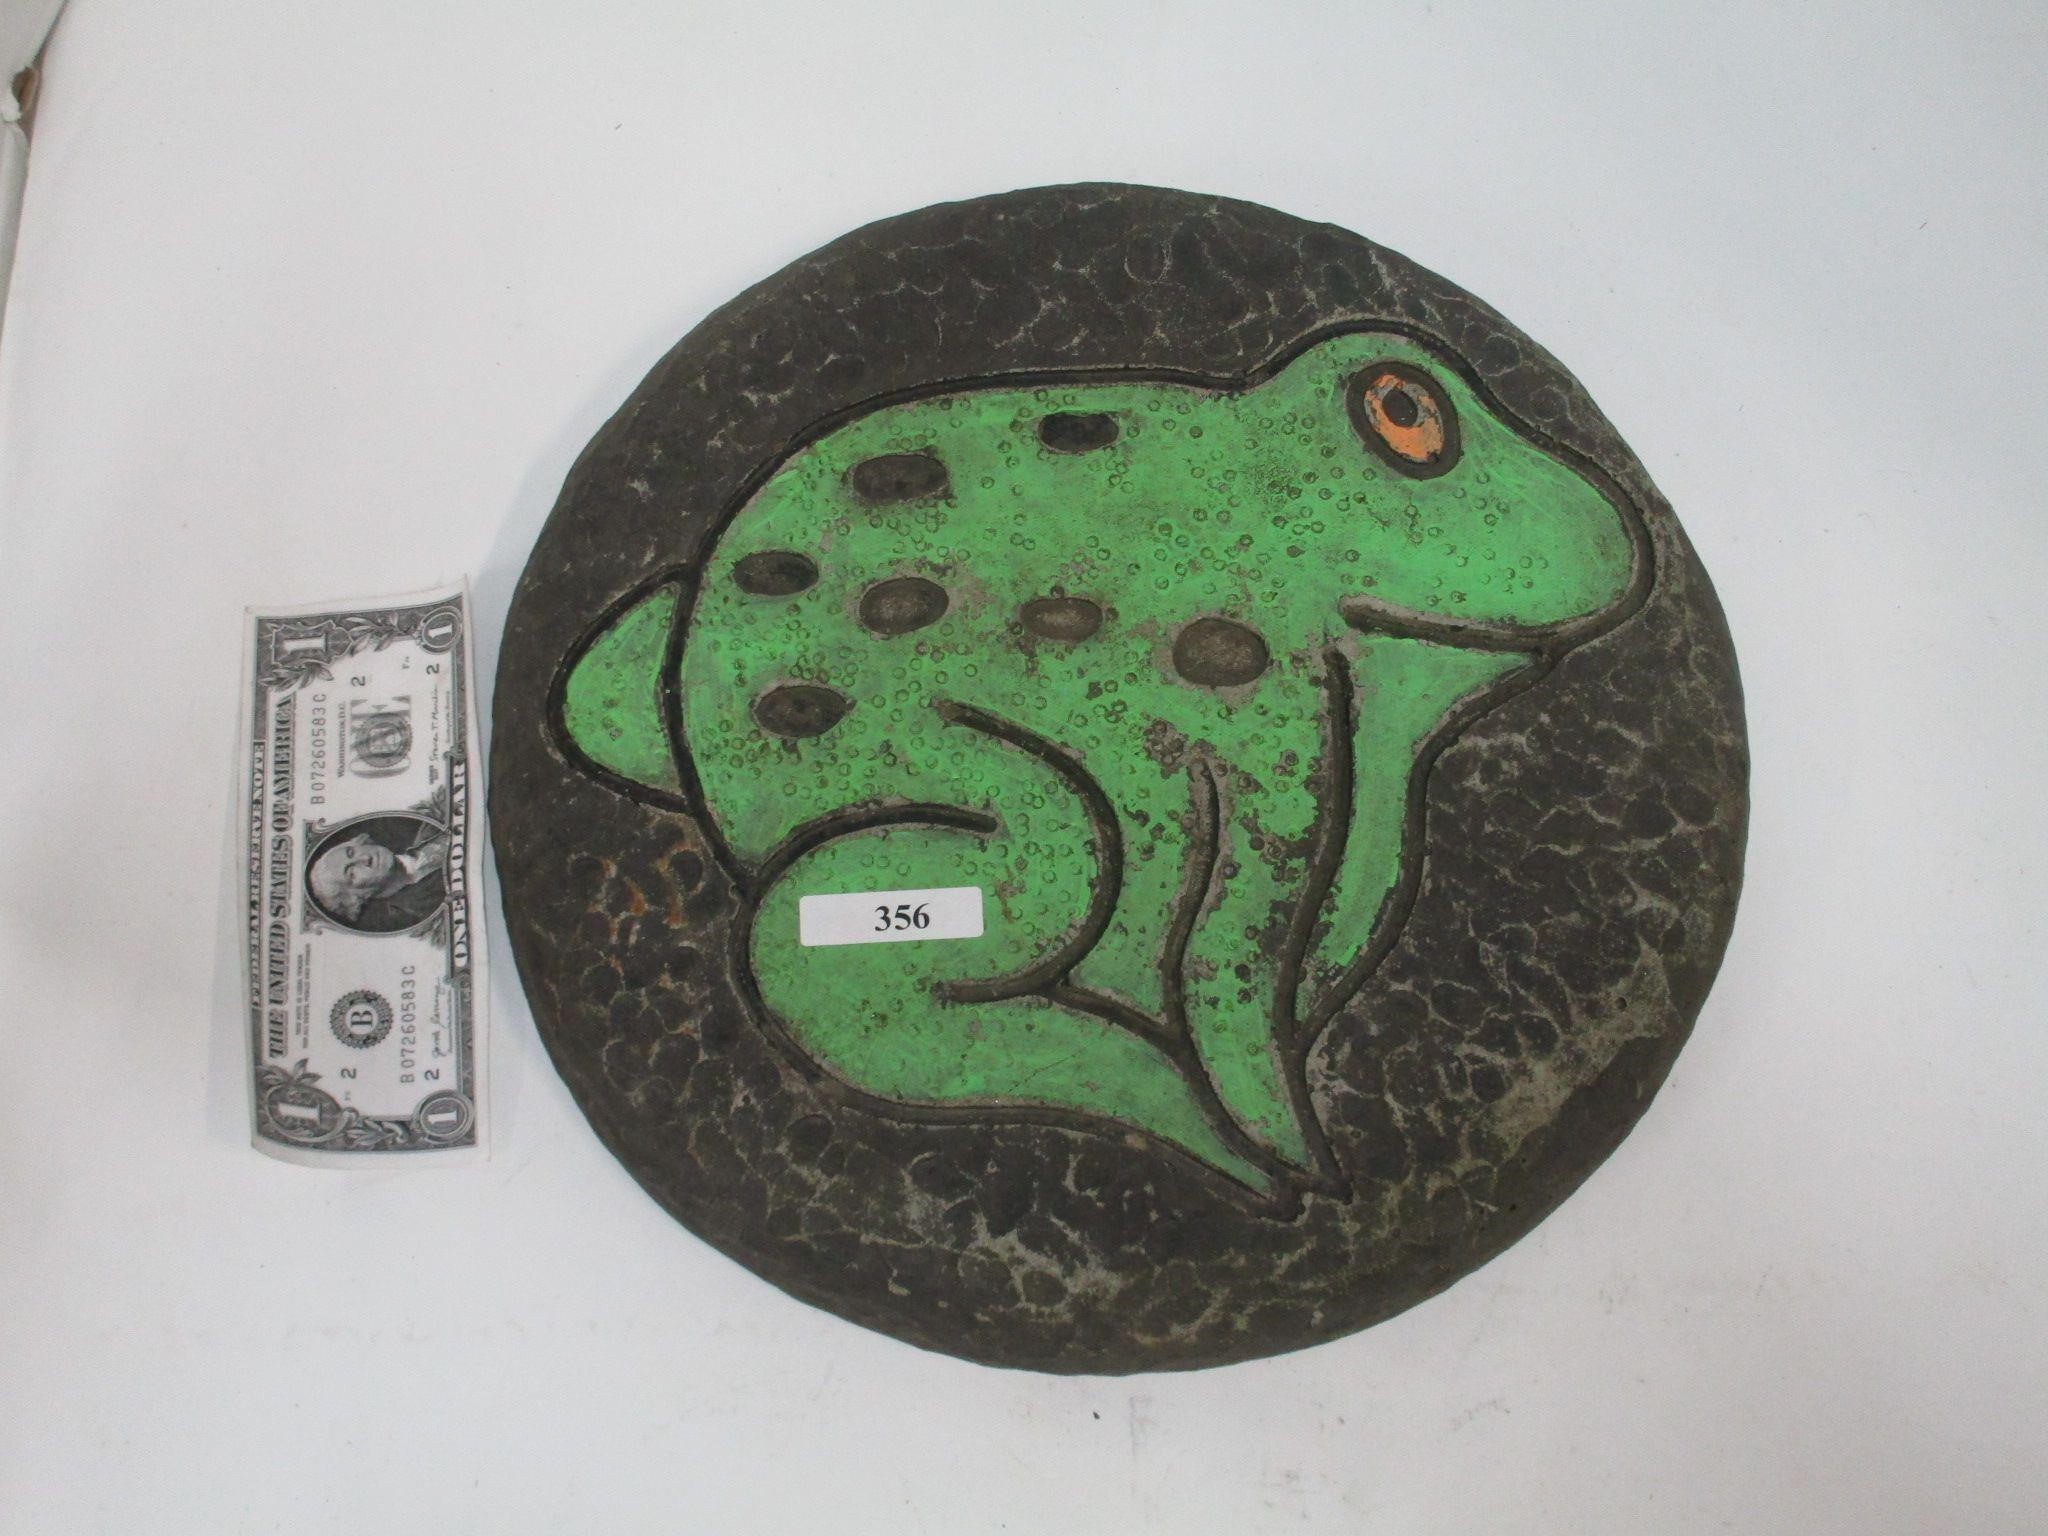 Cute "Frog" Stepping Stone